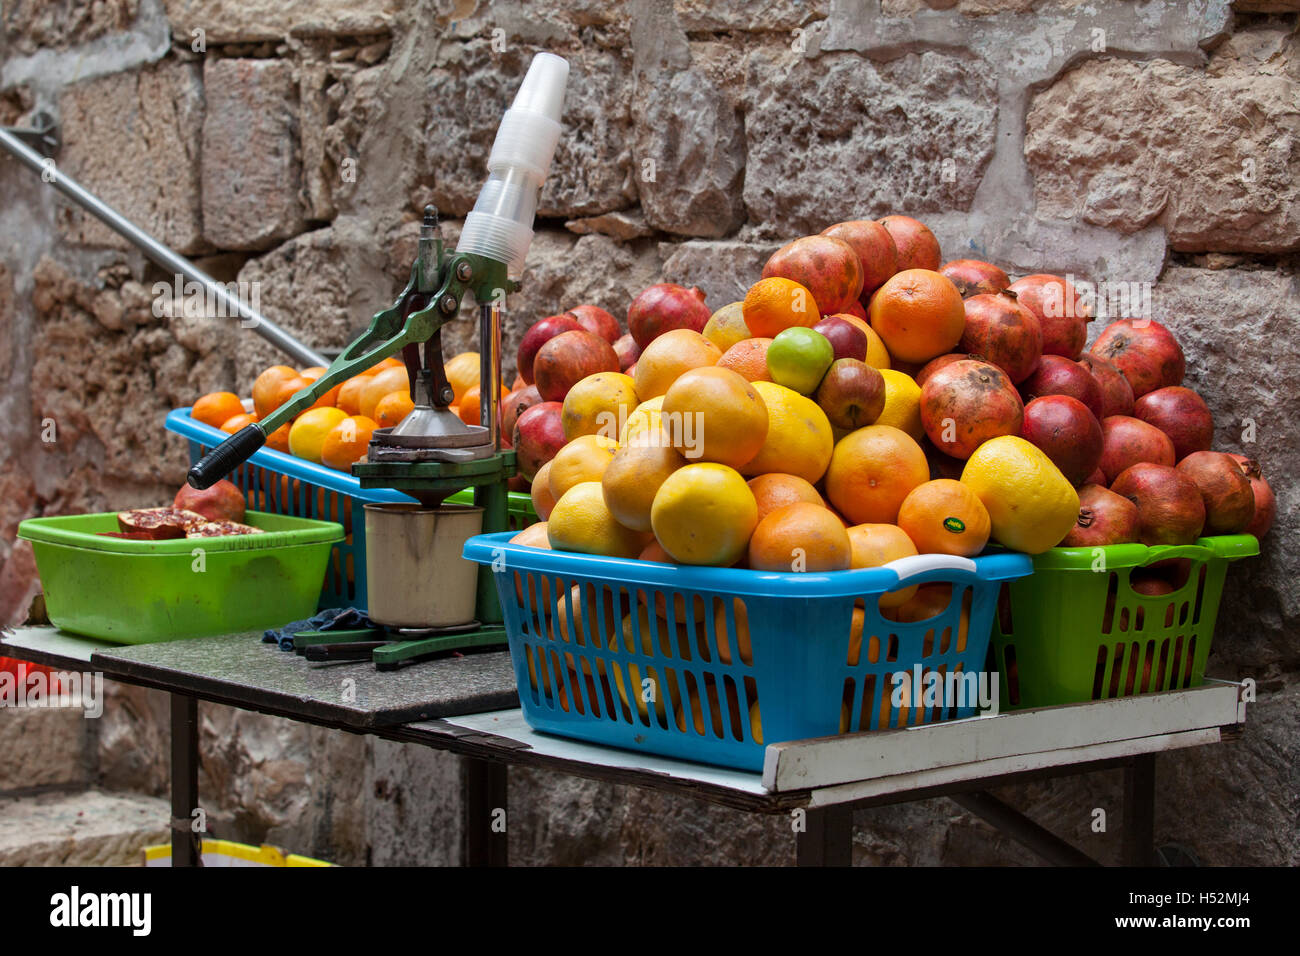 Fruit to be squeezed. Jerusalem Old City, Israel. Stock Photo